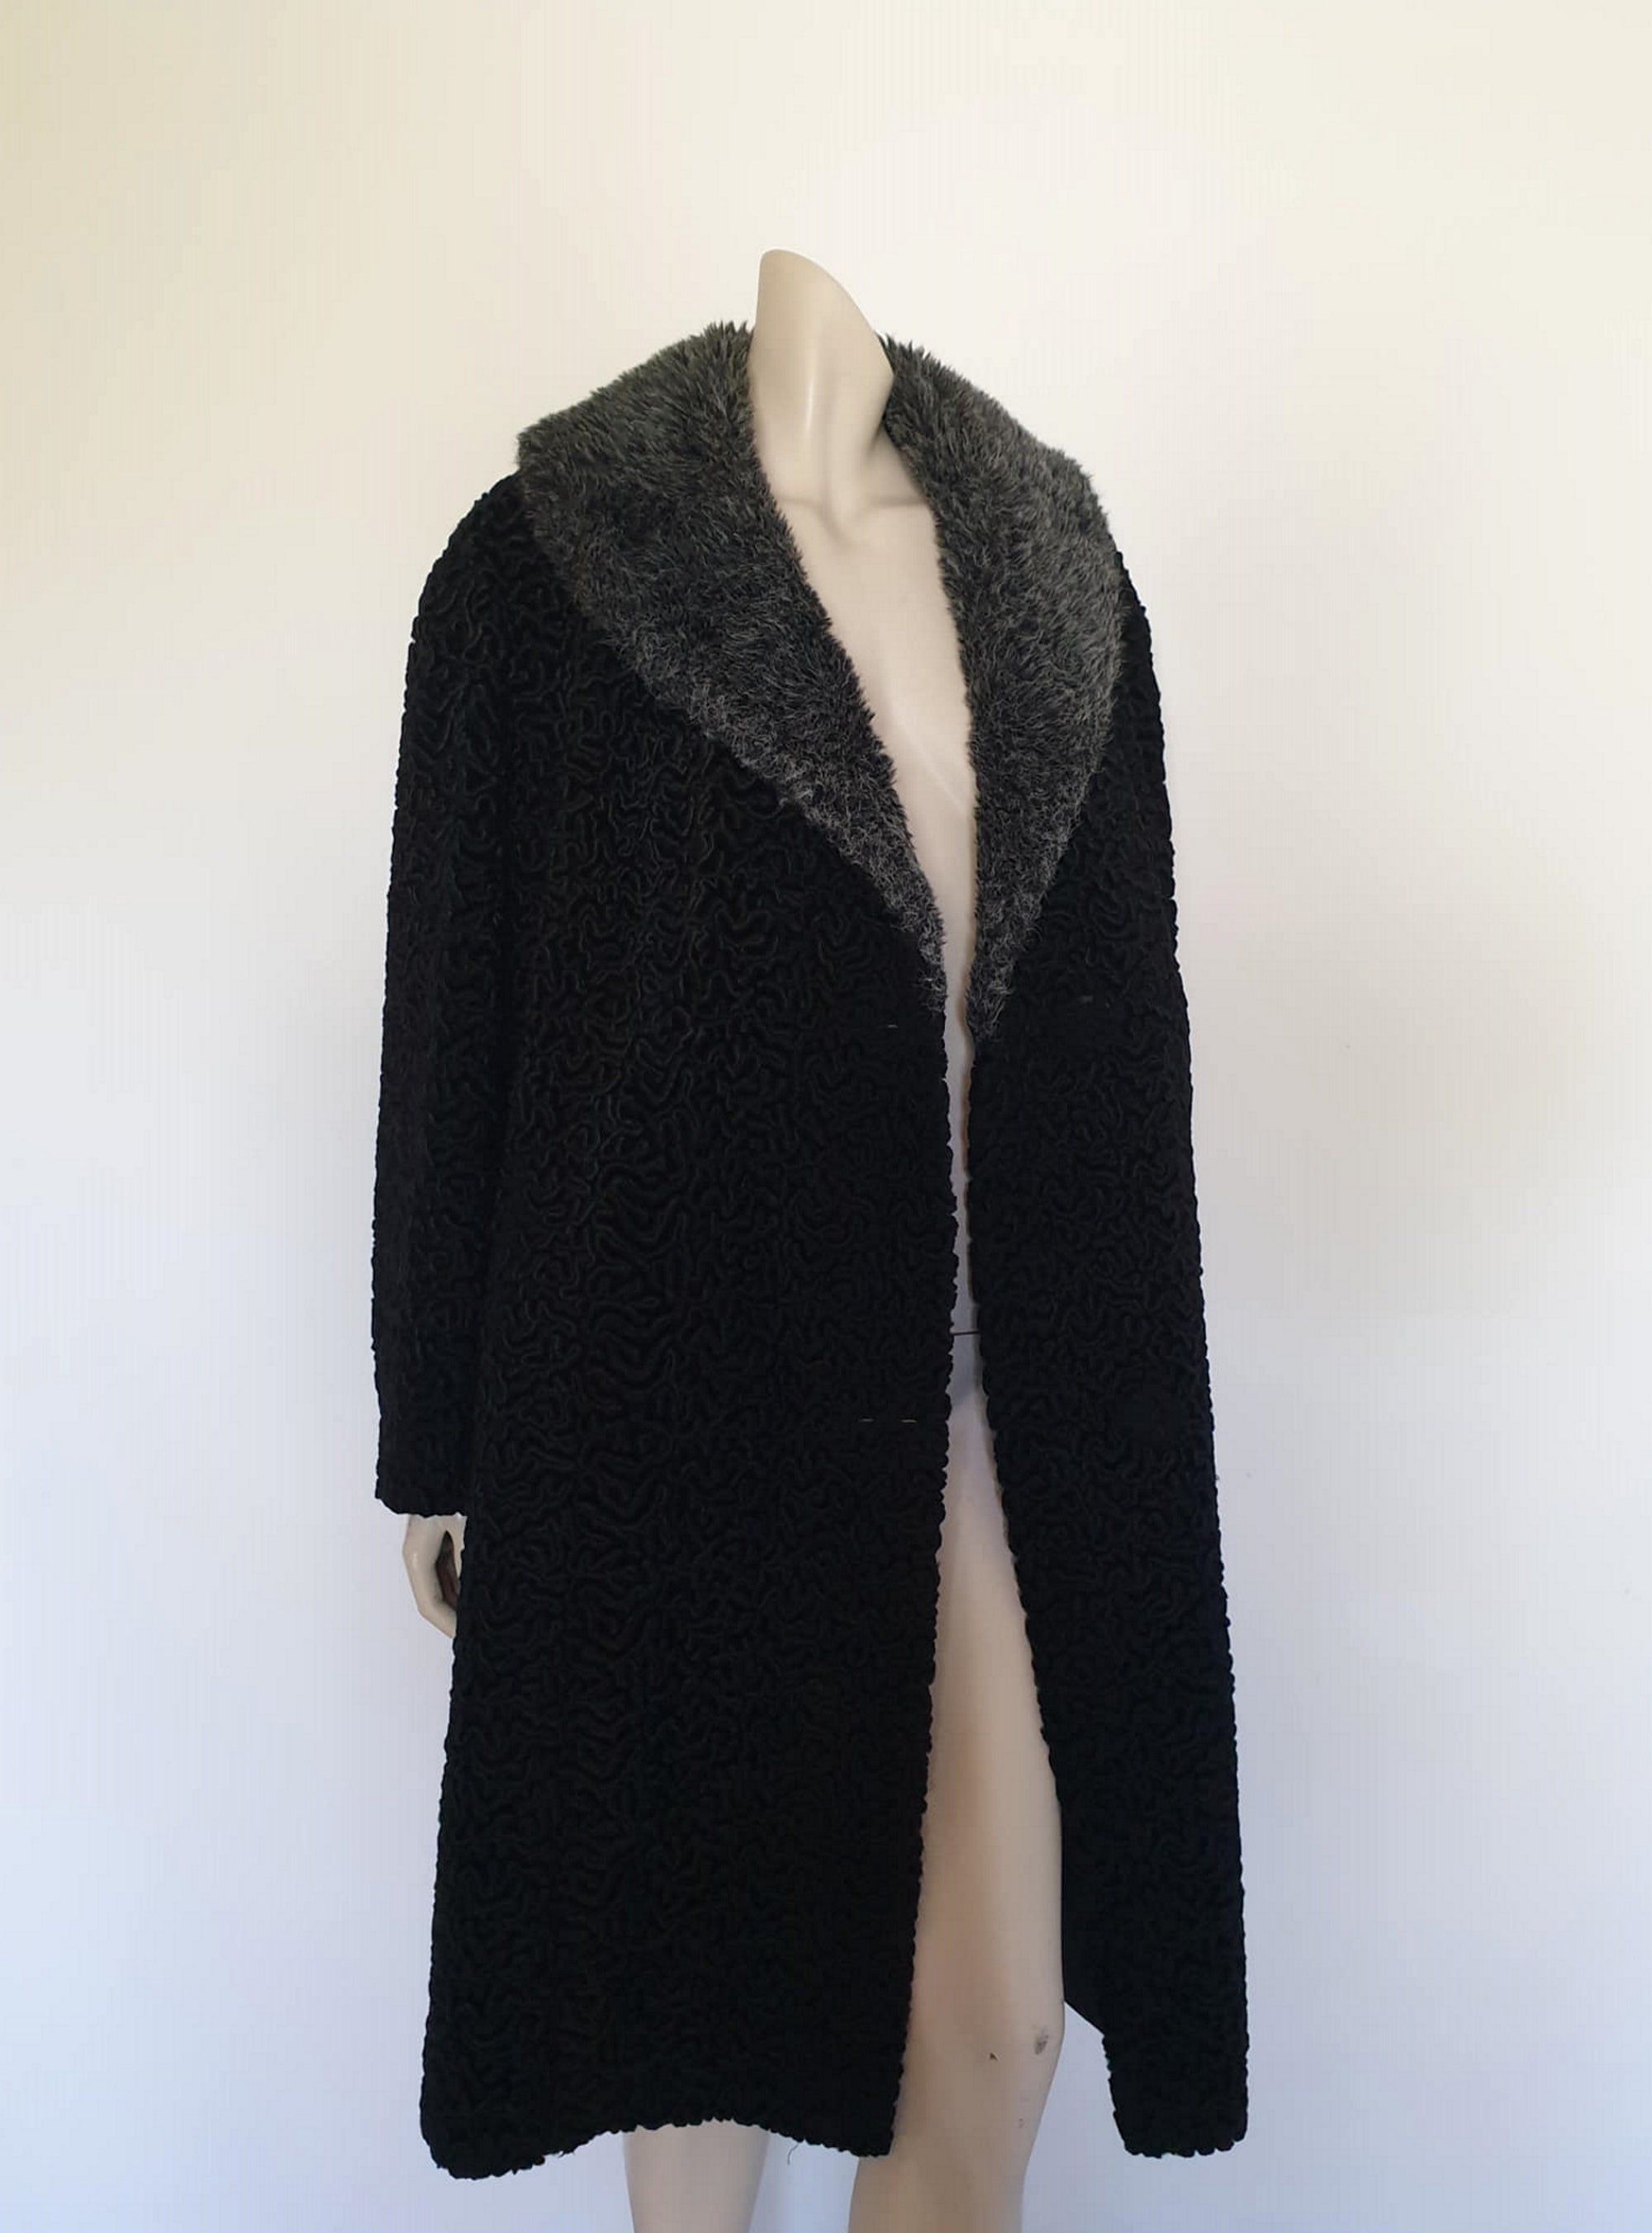 1960s vintage fake astrakhan curly lamb coat with faux fur collar by dasall - Large